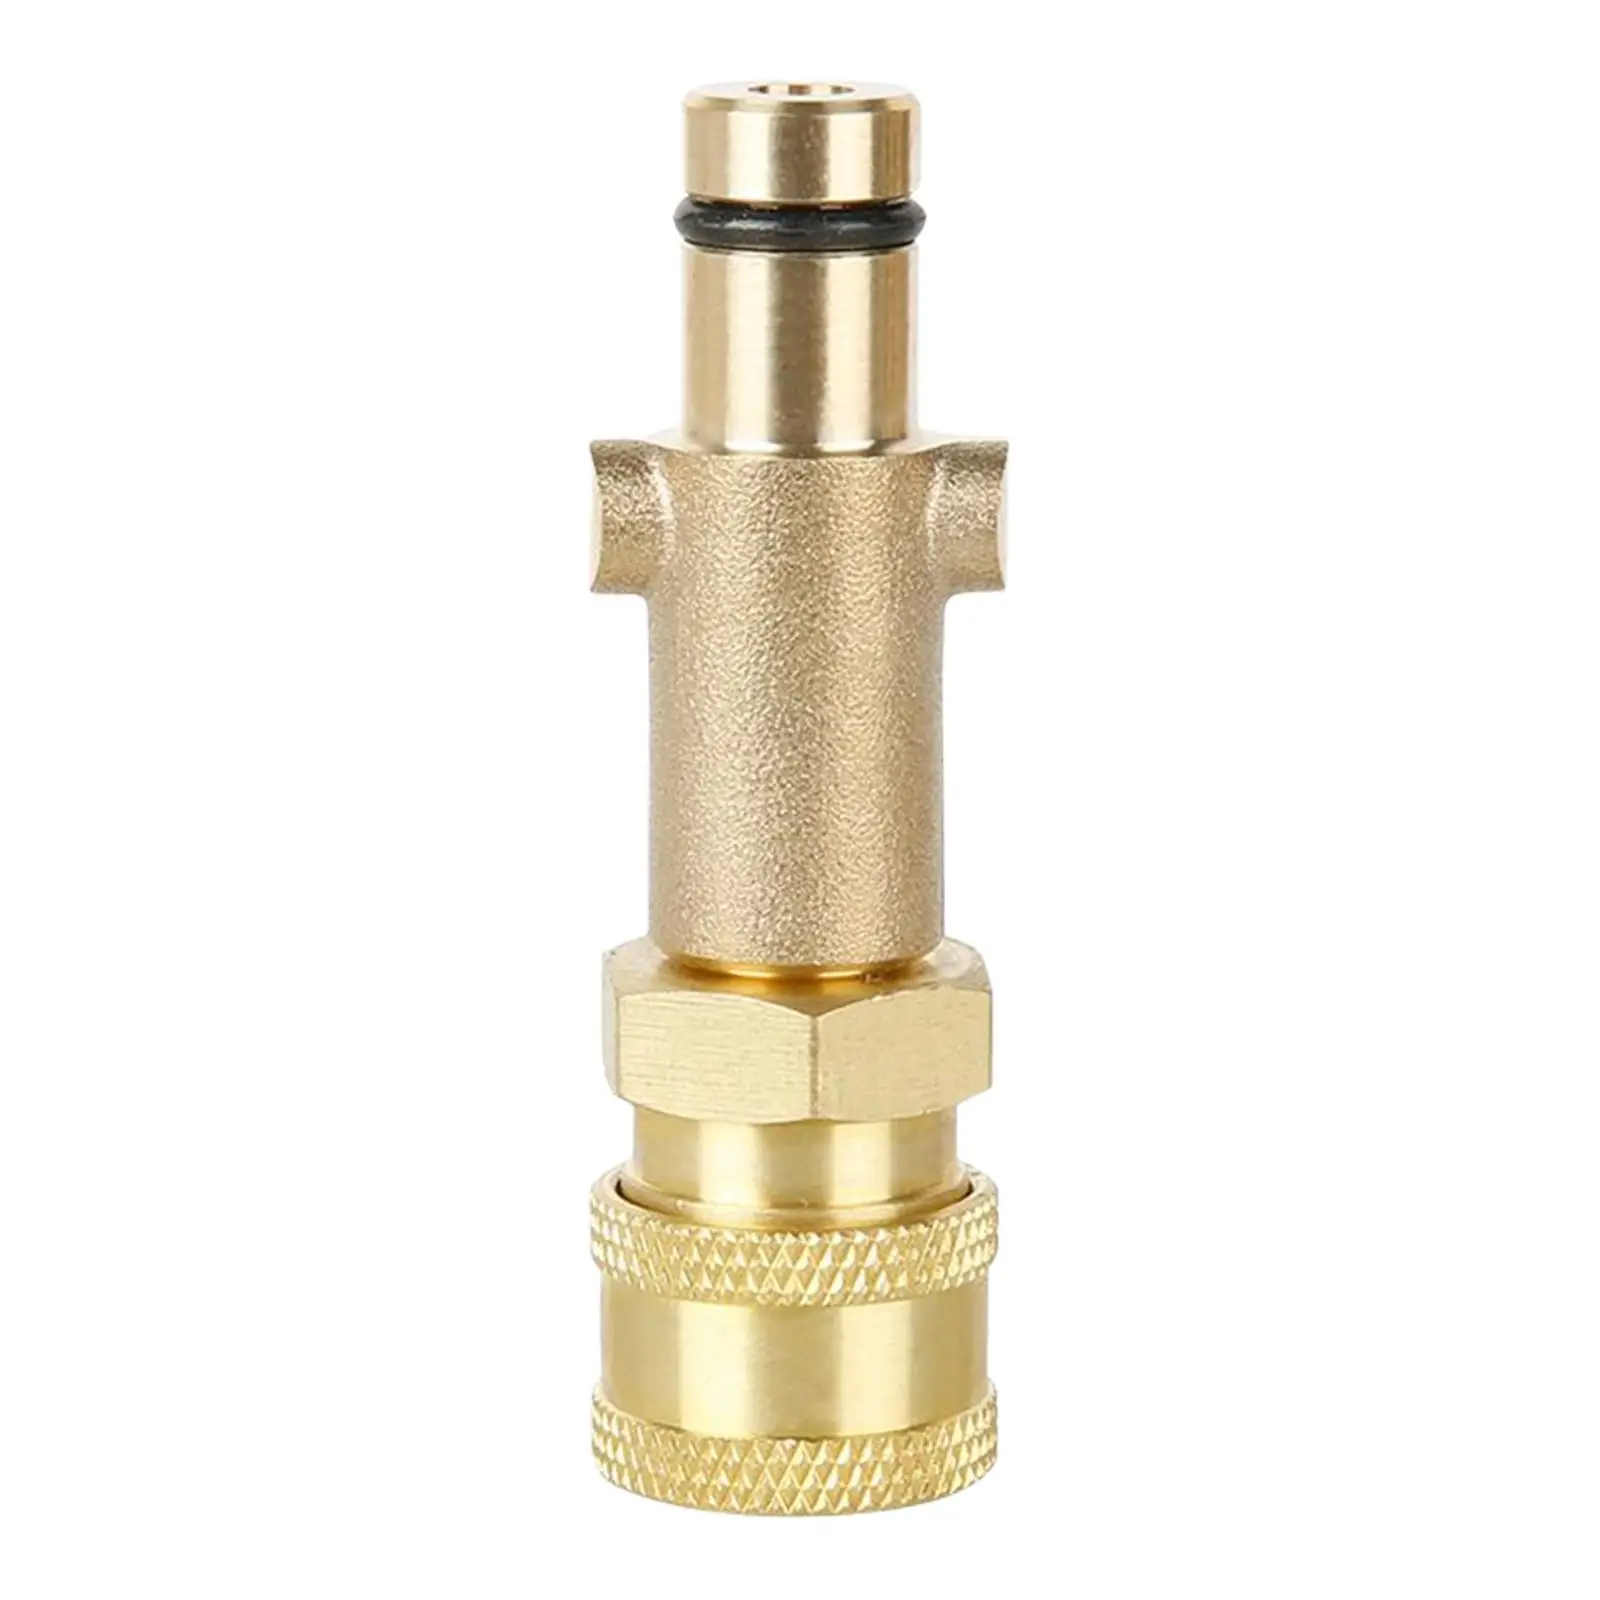 Brass Pressure Washer Quick Connector Adapter for Stihle RE98 Washer Machine Clean